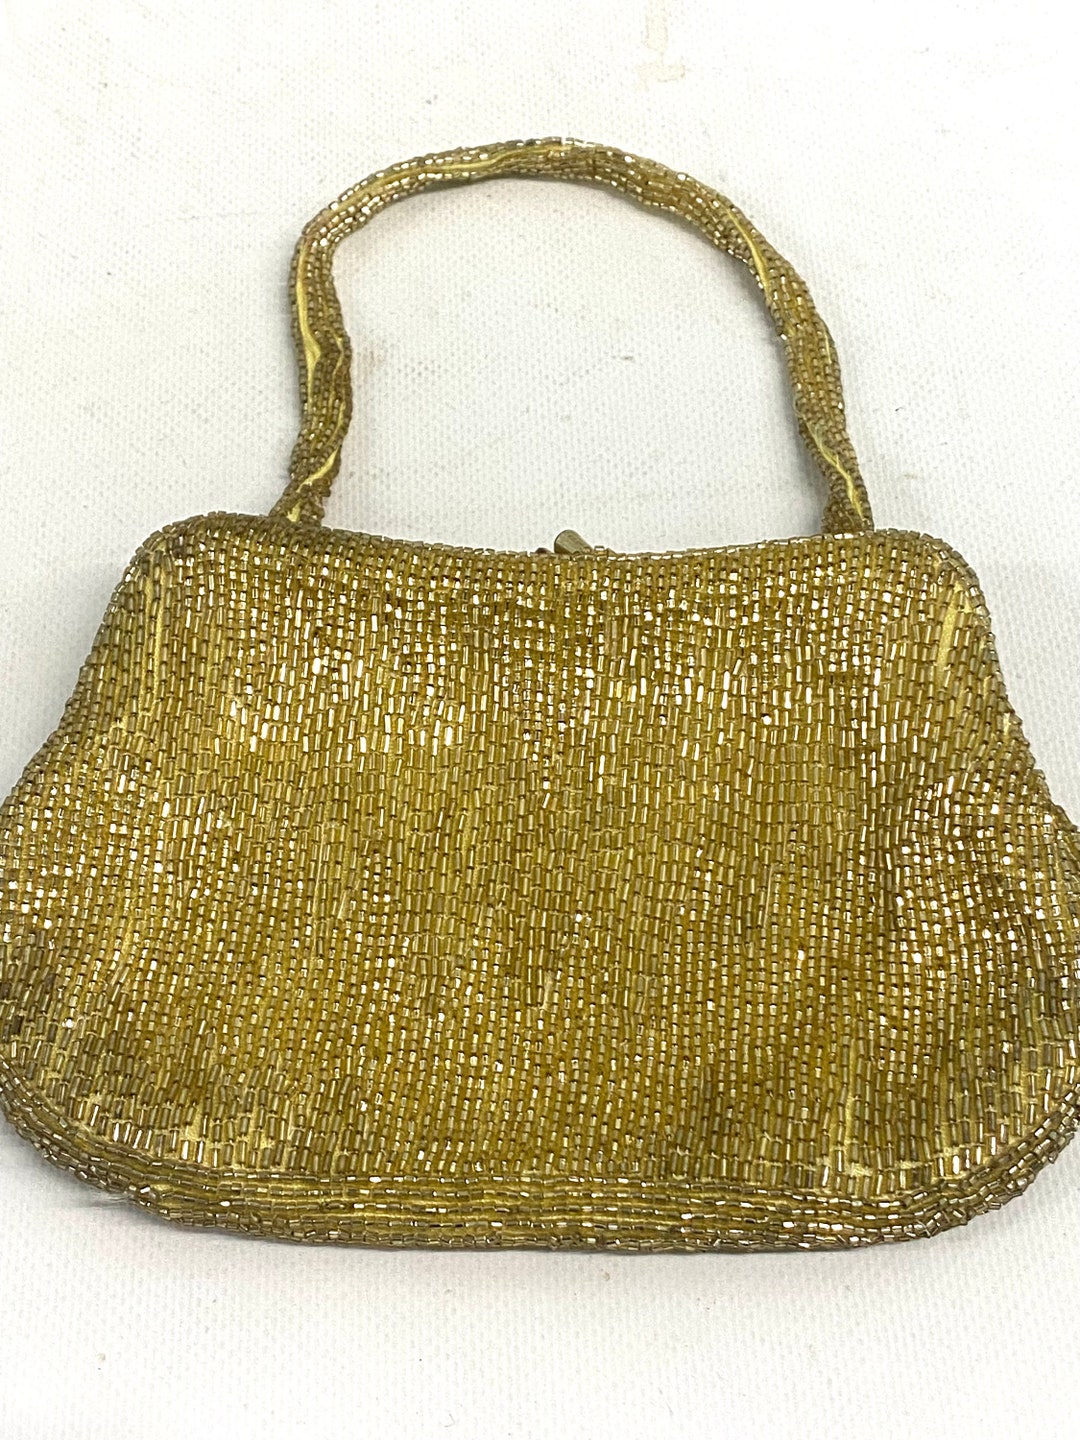 Vintage 1960s Walborg Gold Beaded Evening Purse Made in Japan - Etsy